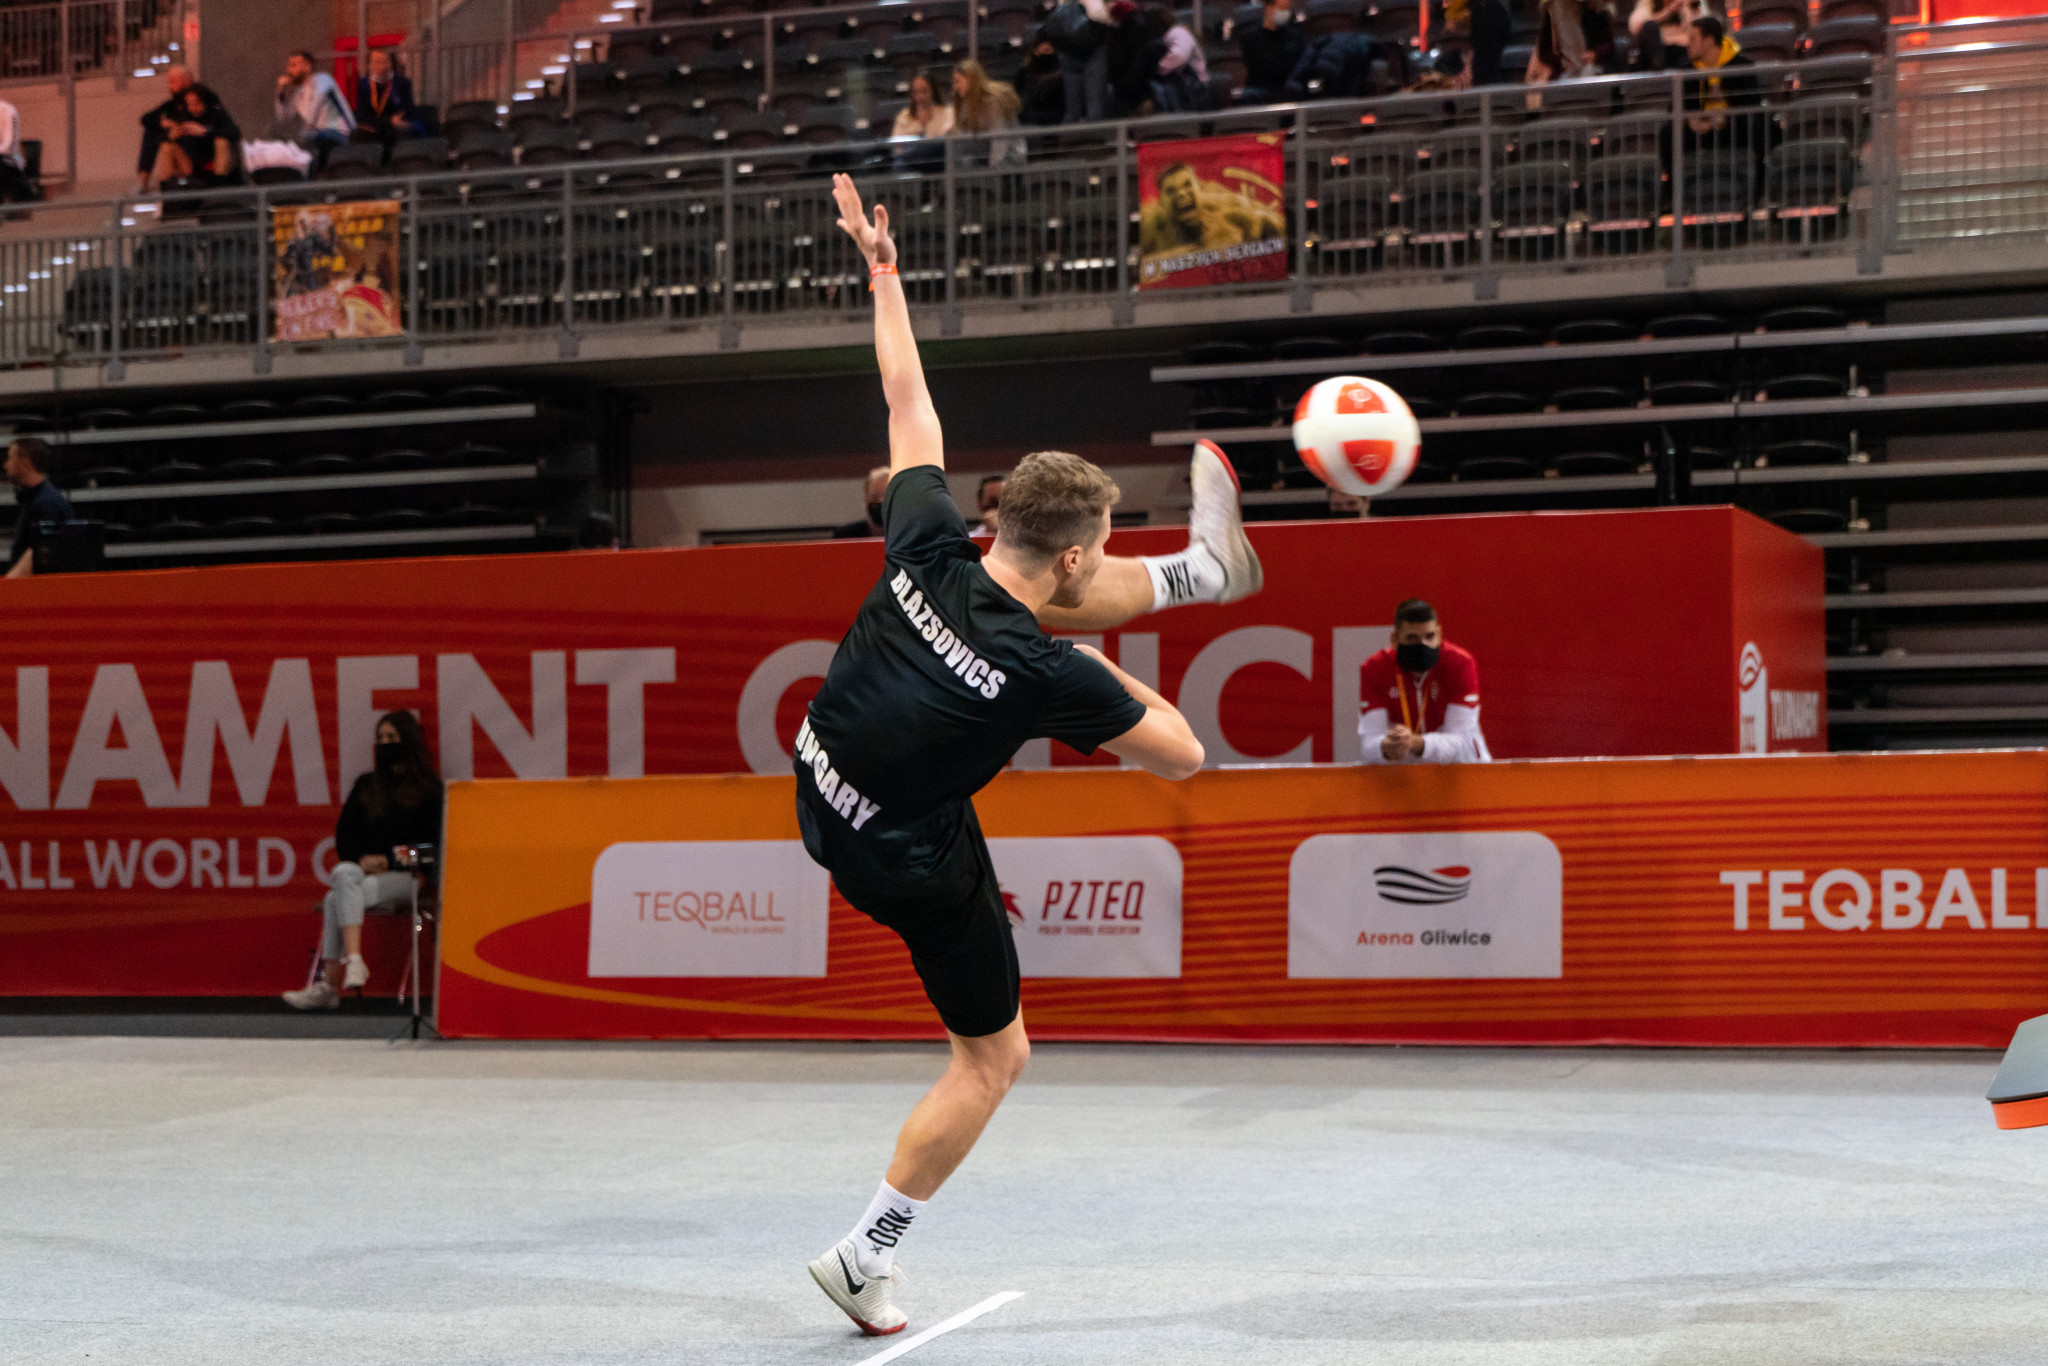 Hungarian players extend stay at top of International Teqball Federation world rankings